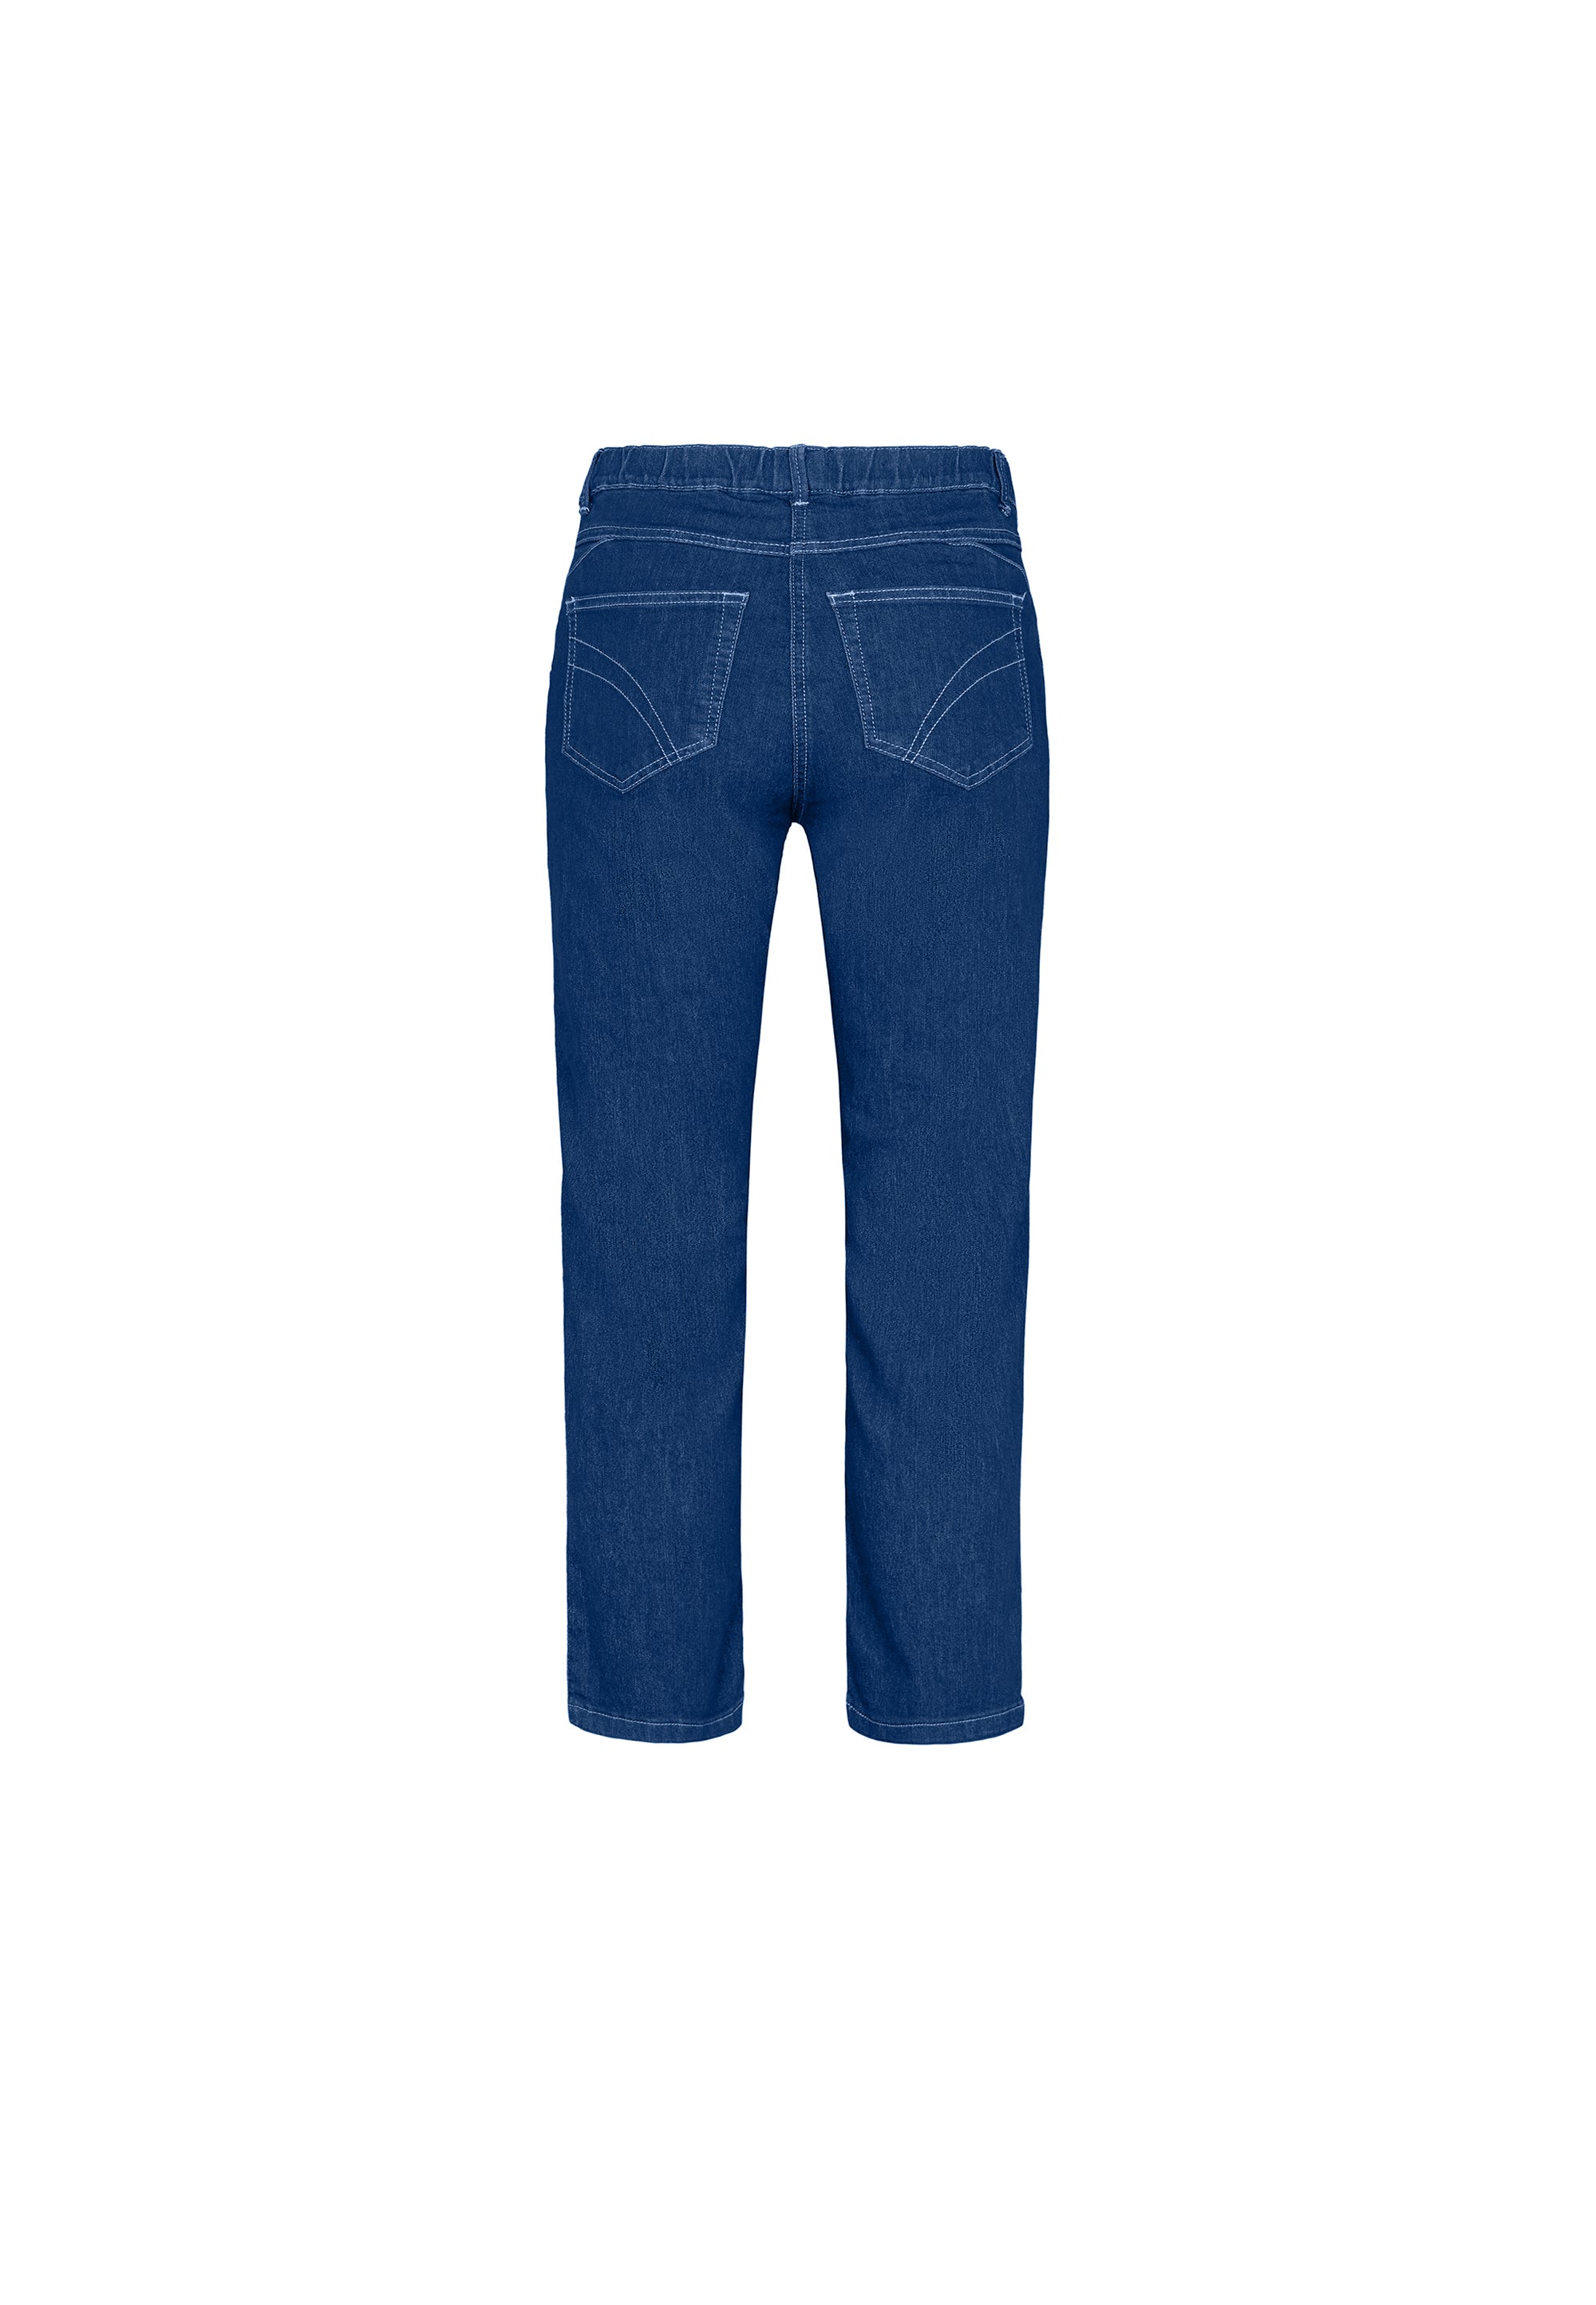 LAURIE Helen Straight - Extra Short Length Trousers STRAIGHT 49401 Blue Denim